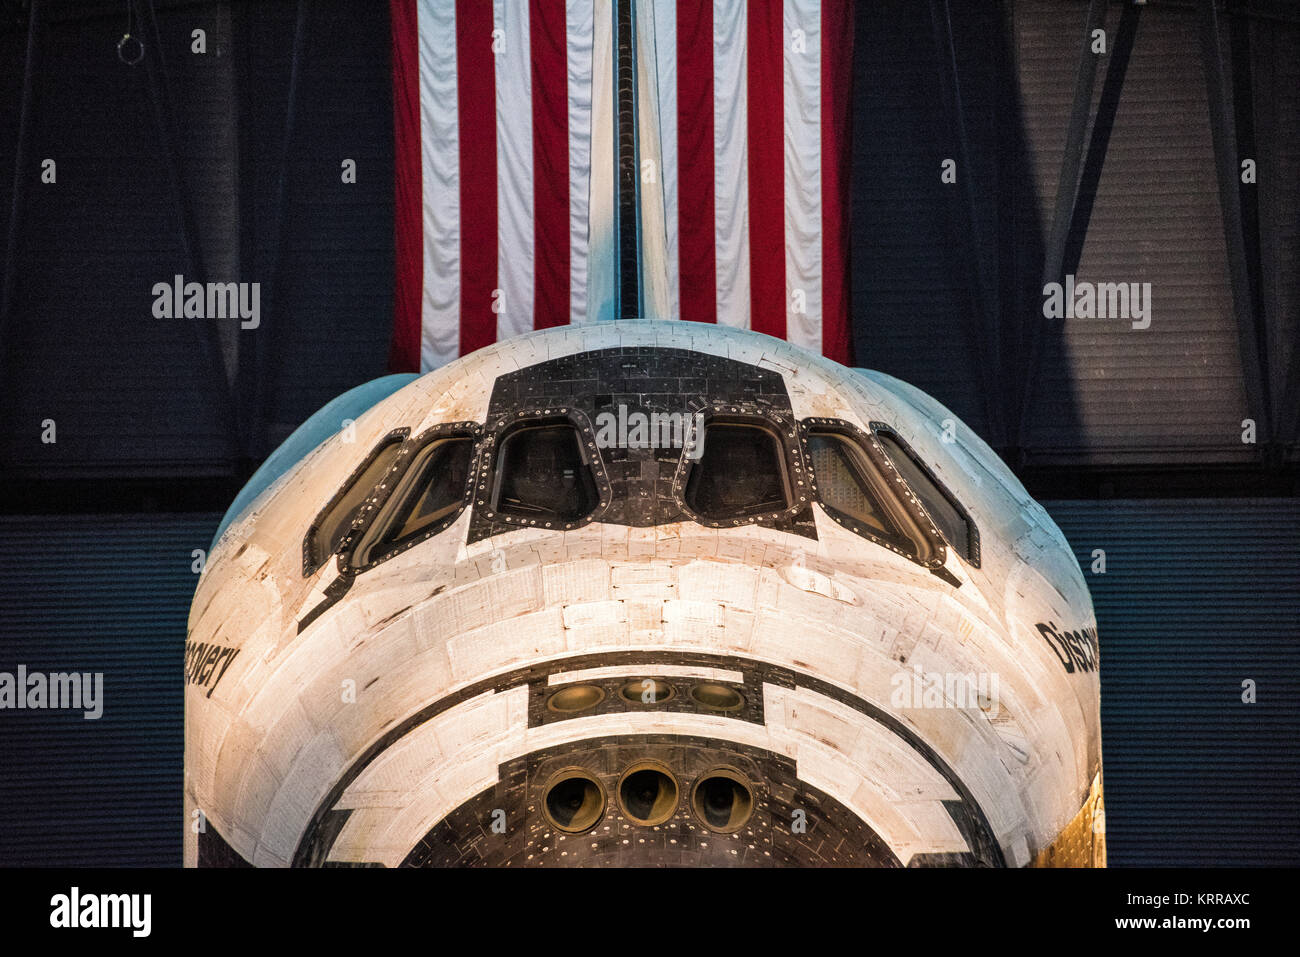 The space shuttle Discovery on display at the Udvar-Hazy Center at the Smithsonian's National Air and Space Museum at Chantilly, Virginia. Stock Photo